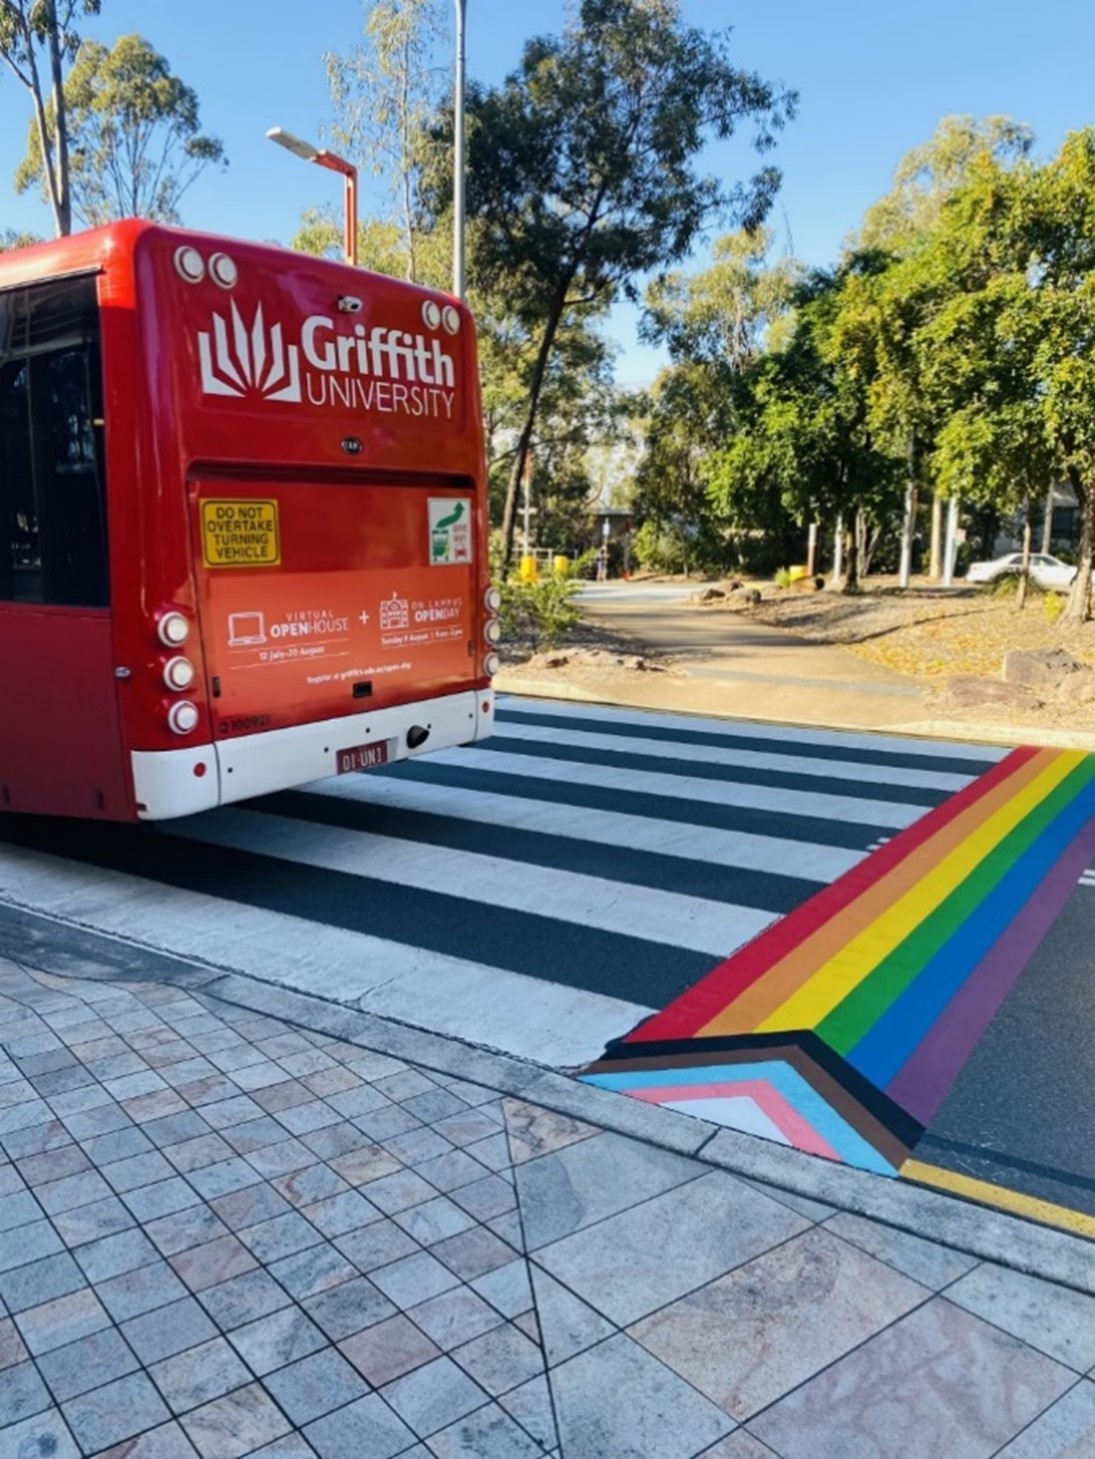 A Griffith University bus drives over a pedestrian crossing on which a Progress Pride Flag has been painted.